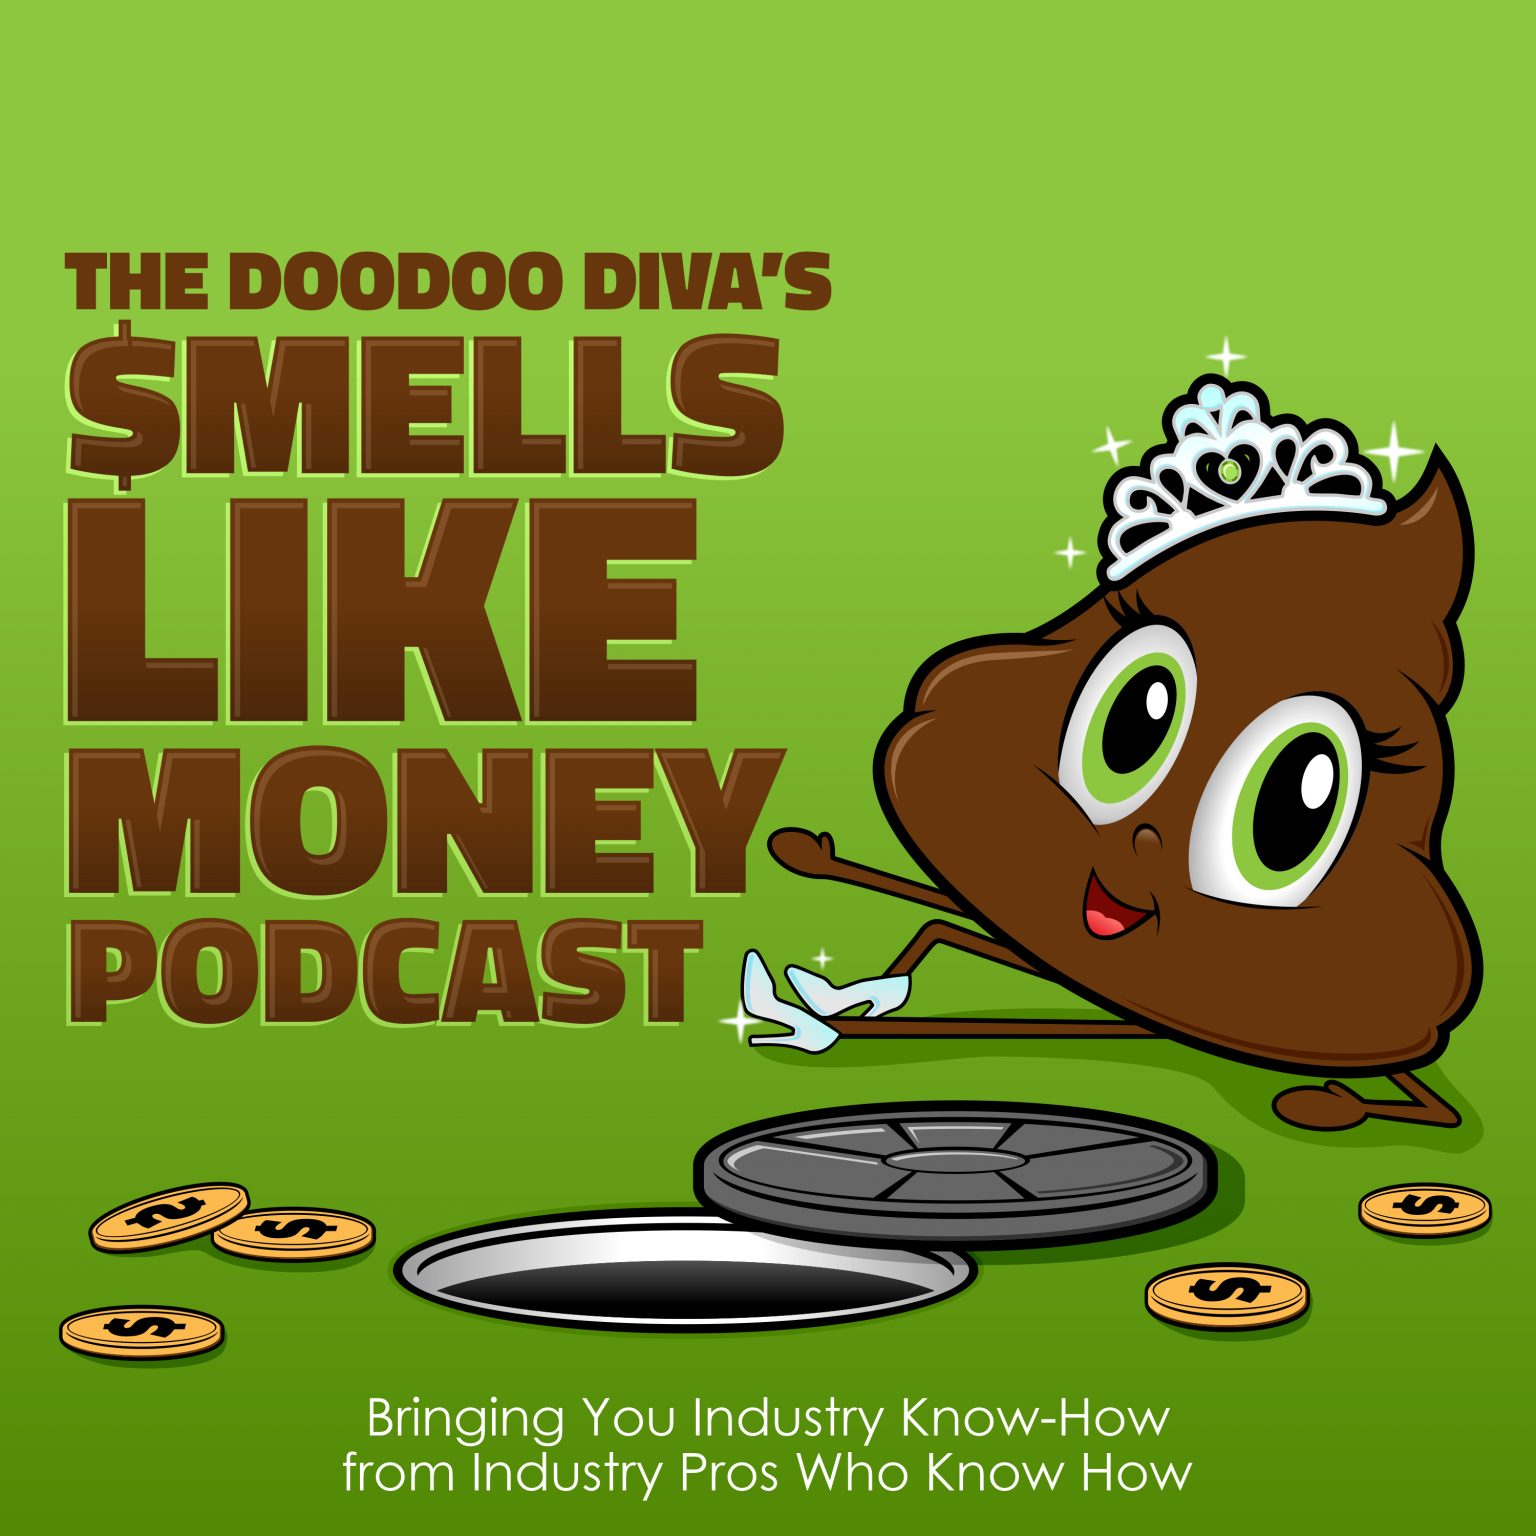 Featured image for “SediVision Founder, Denver Stutler, Featured on Podcast with DooDoo Diva”